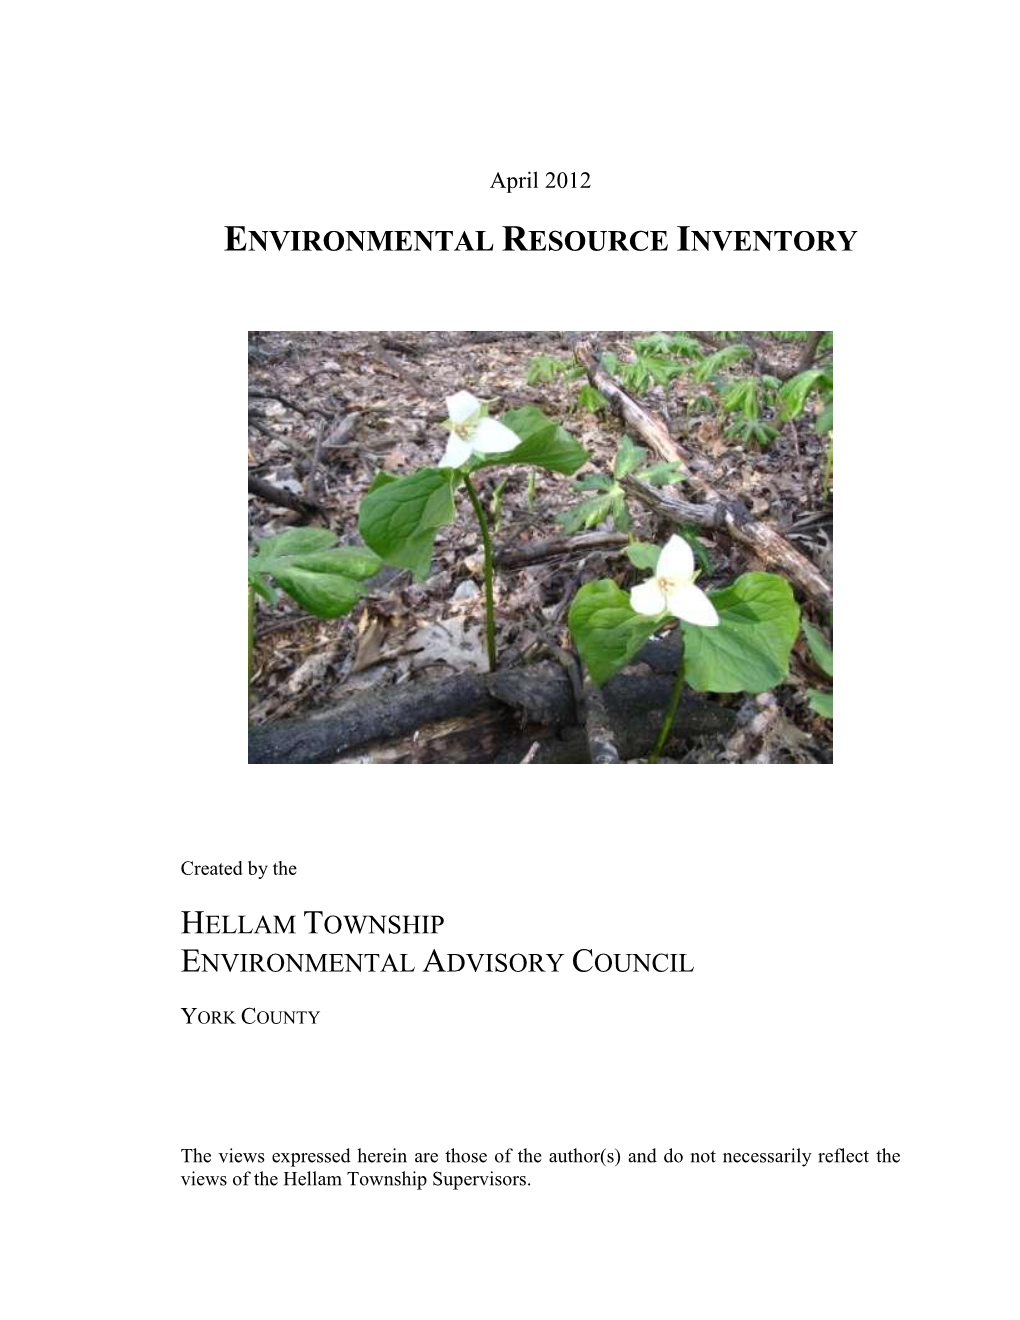 Environmental Resources Inventory 2012 W/ Appendices